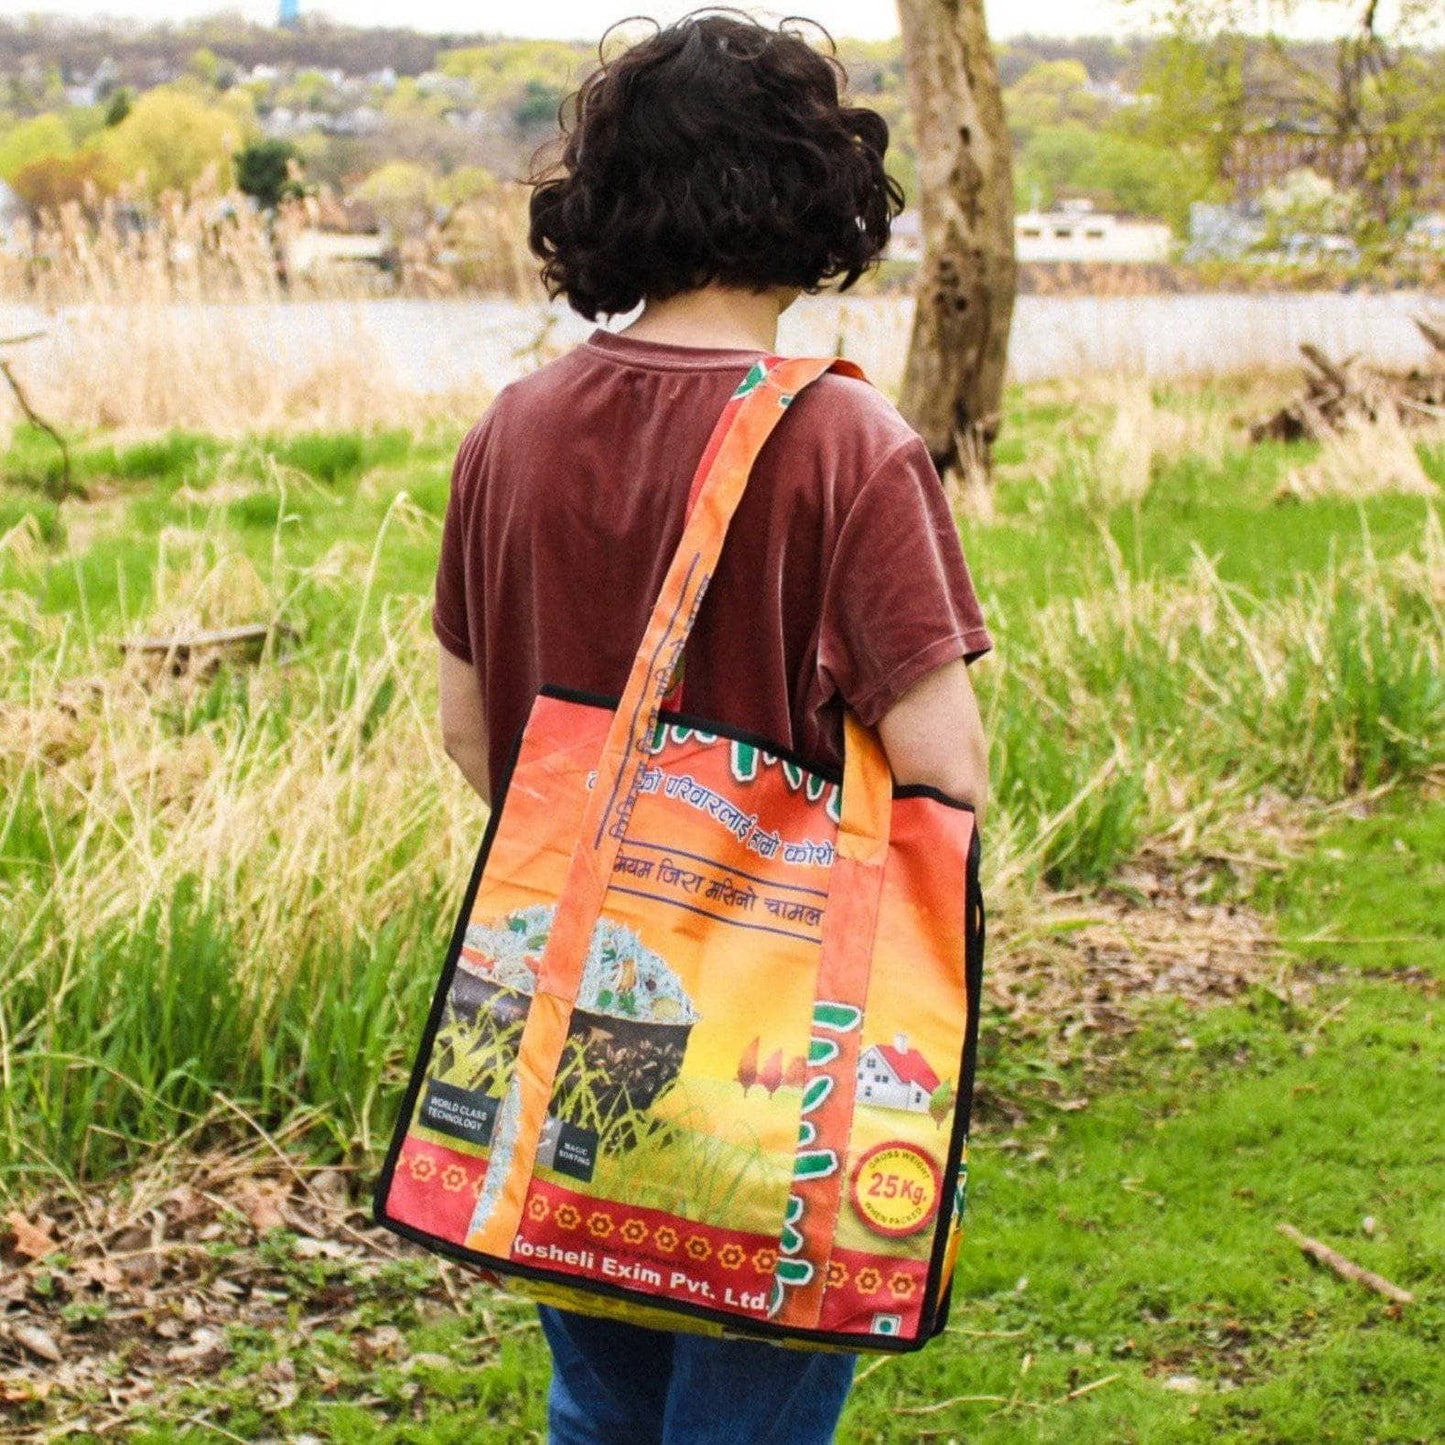 Recycled rice tote bag being carried by model in a grassy field.